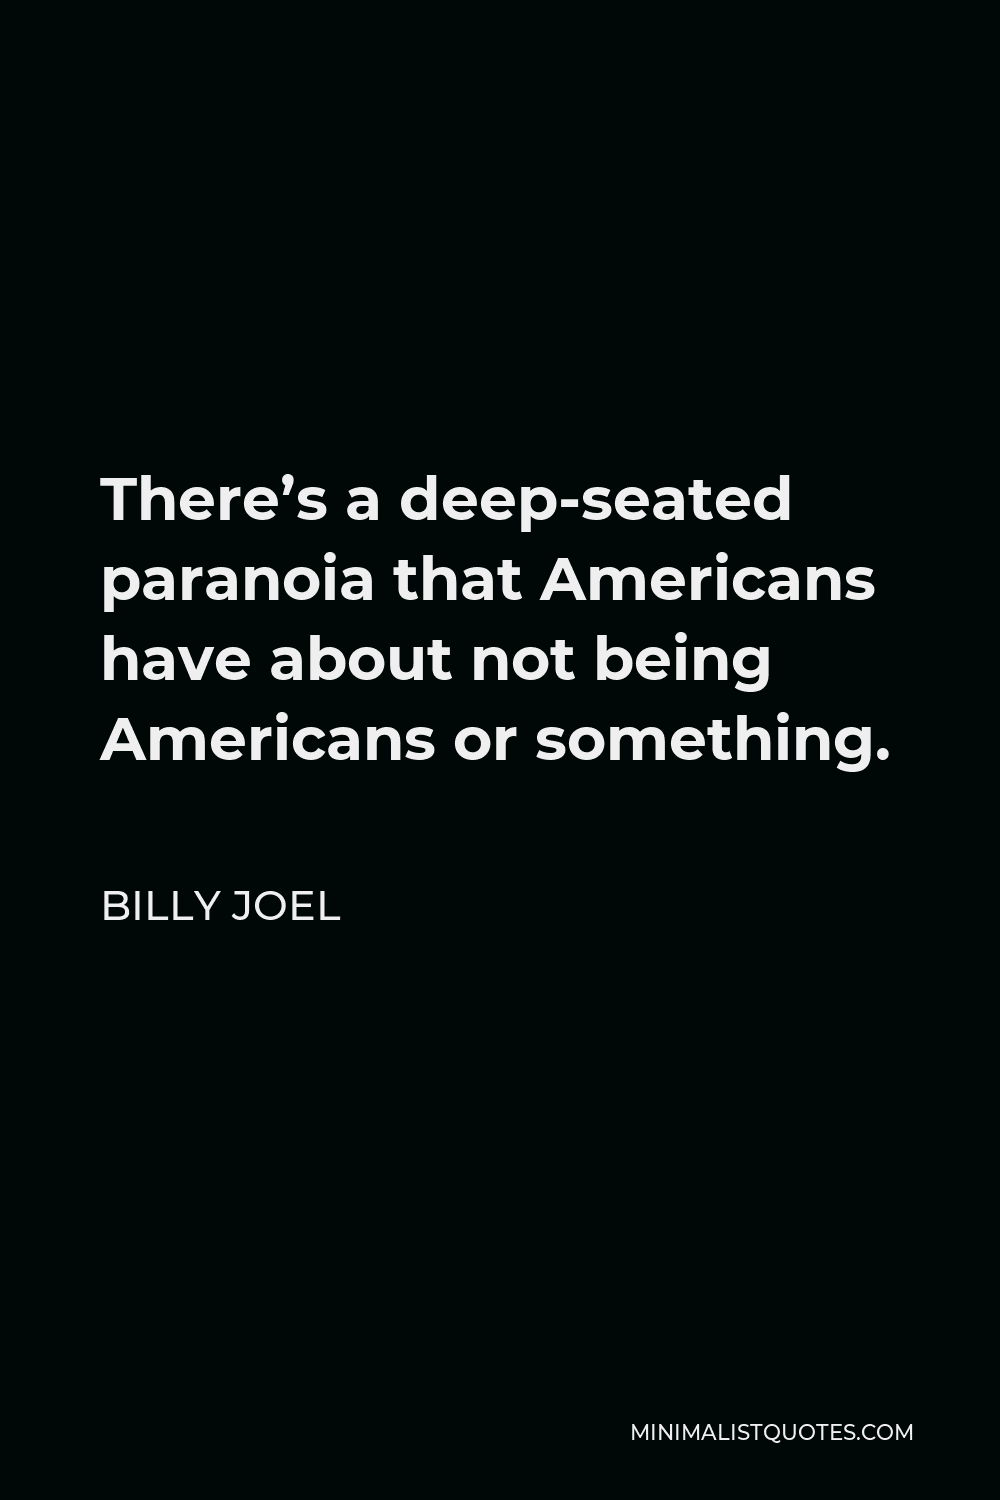 Billy Joel Quote - There’s a deep-seated paranoia that Americans have about not being Americans or something.